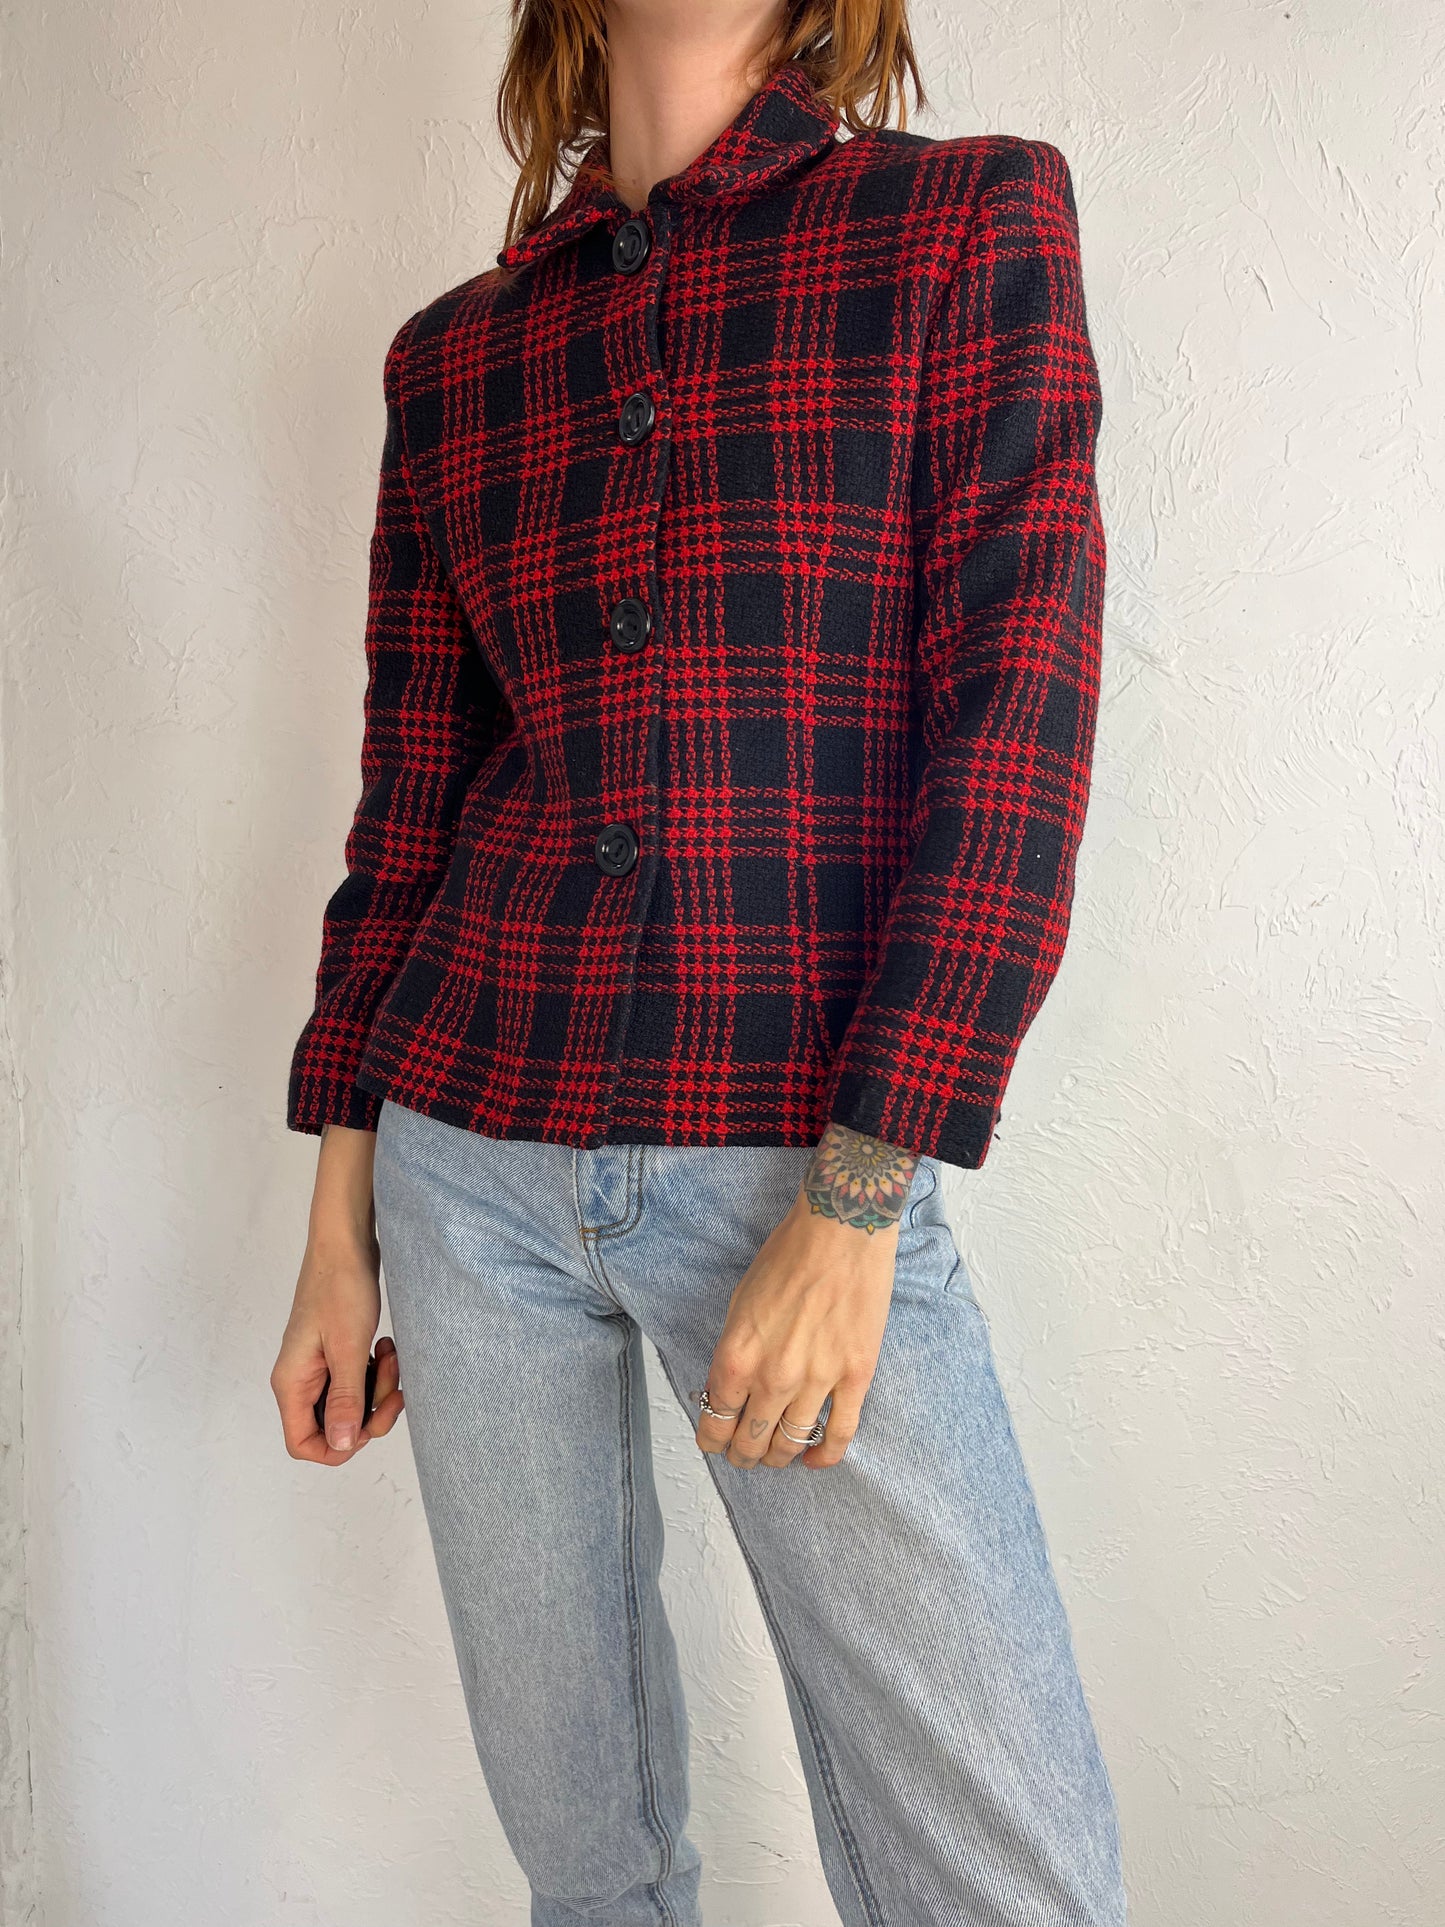 90s 'Louben' Red and Black Wool Jacket / 6